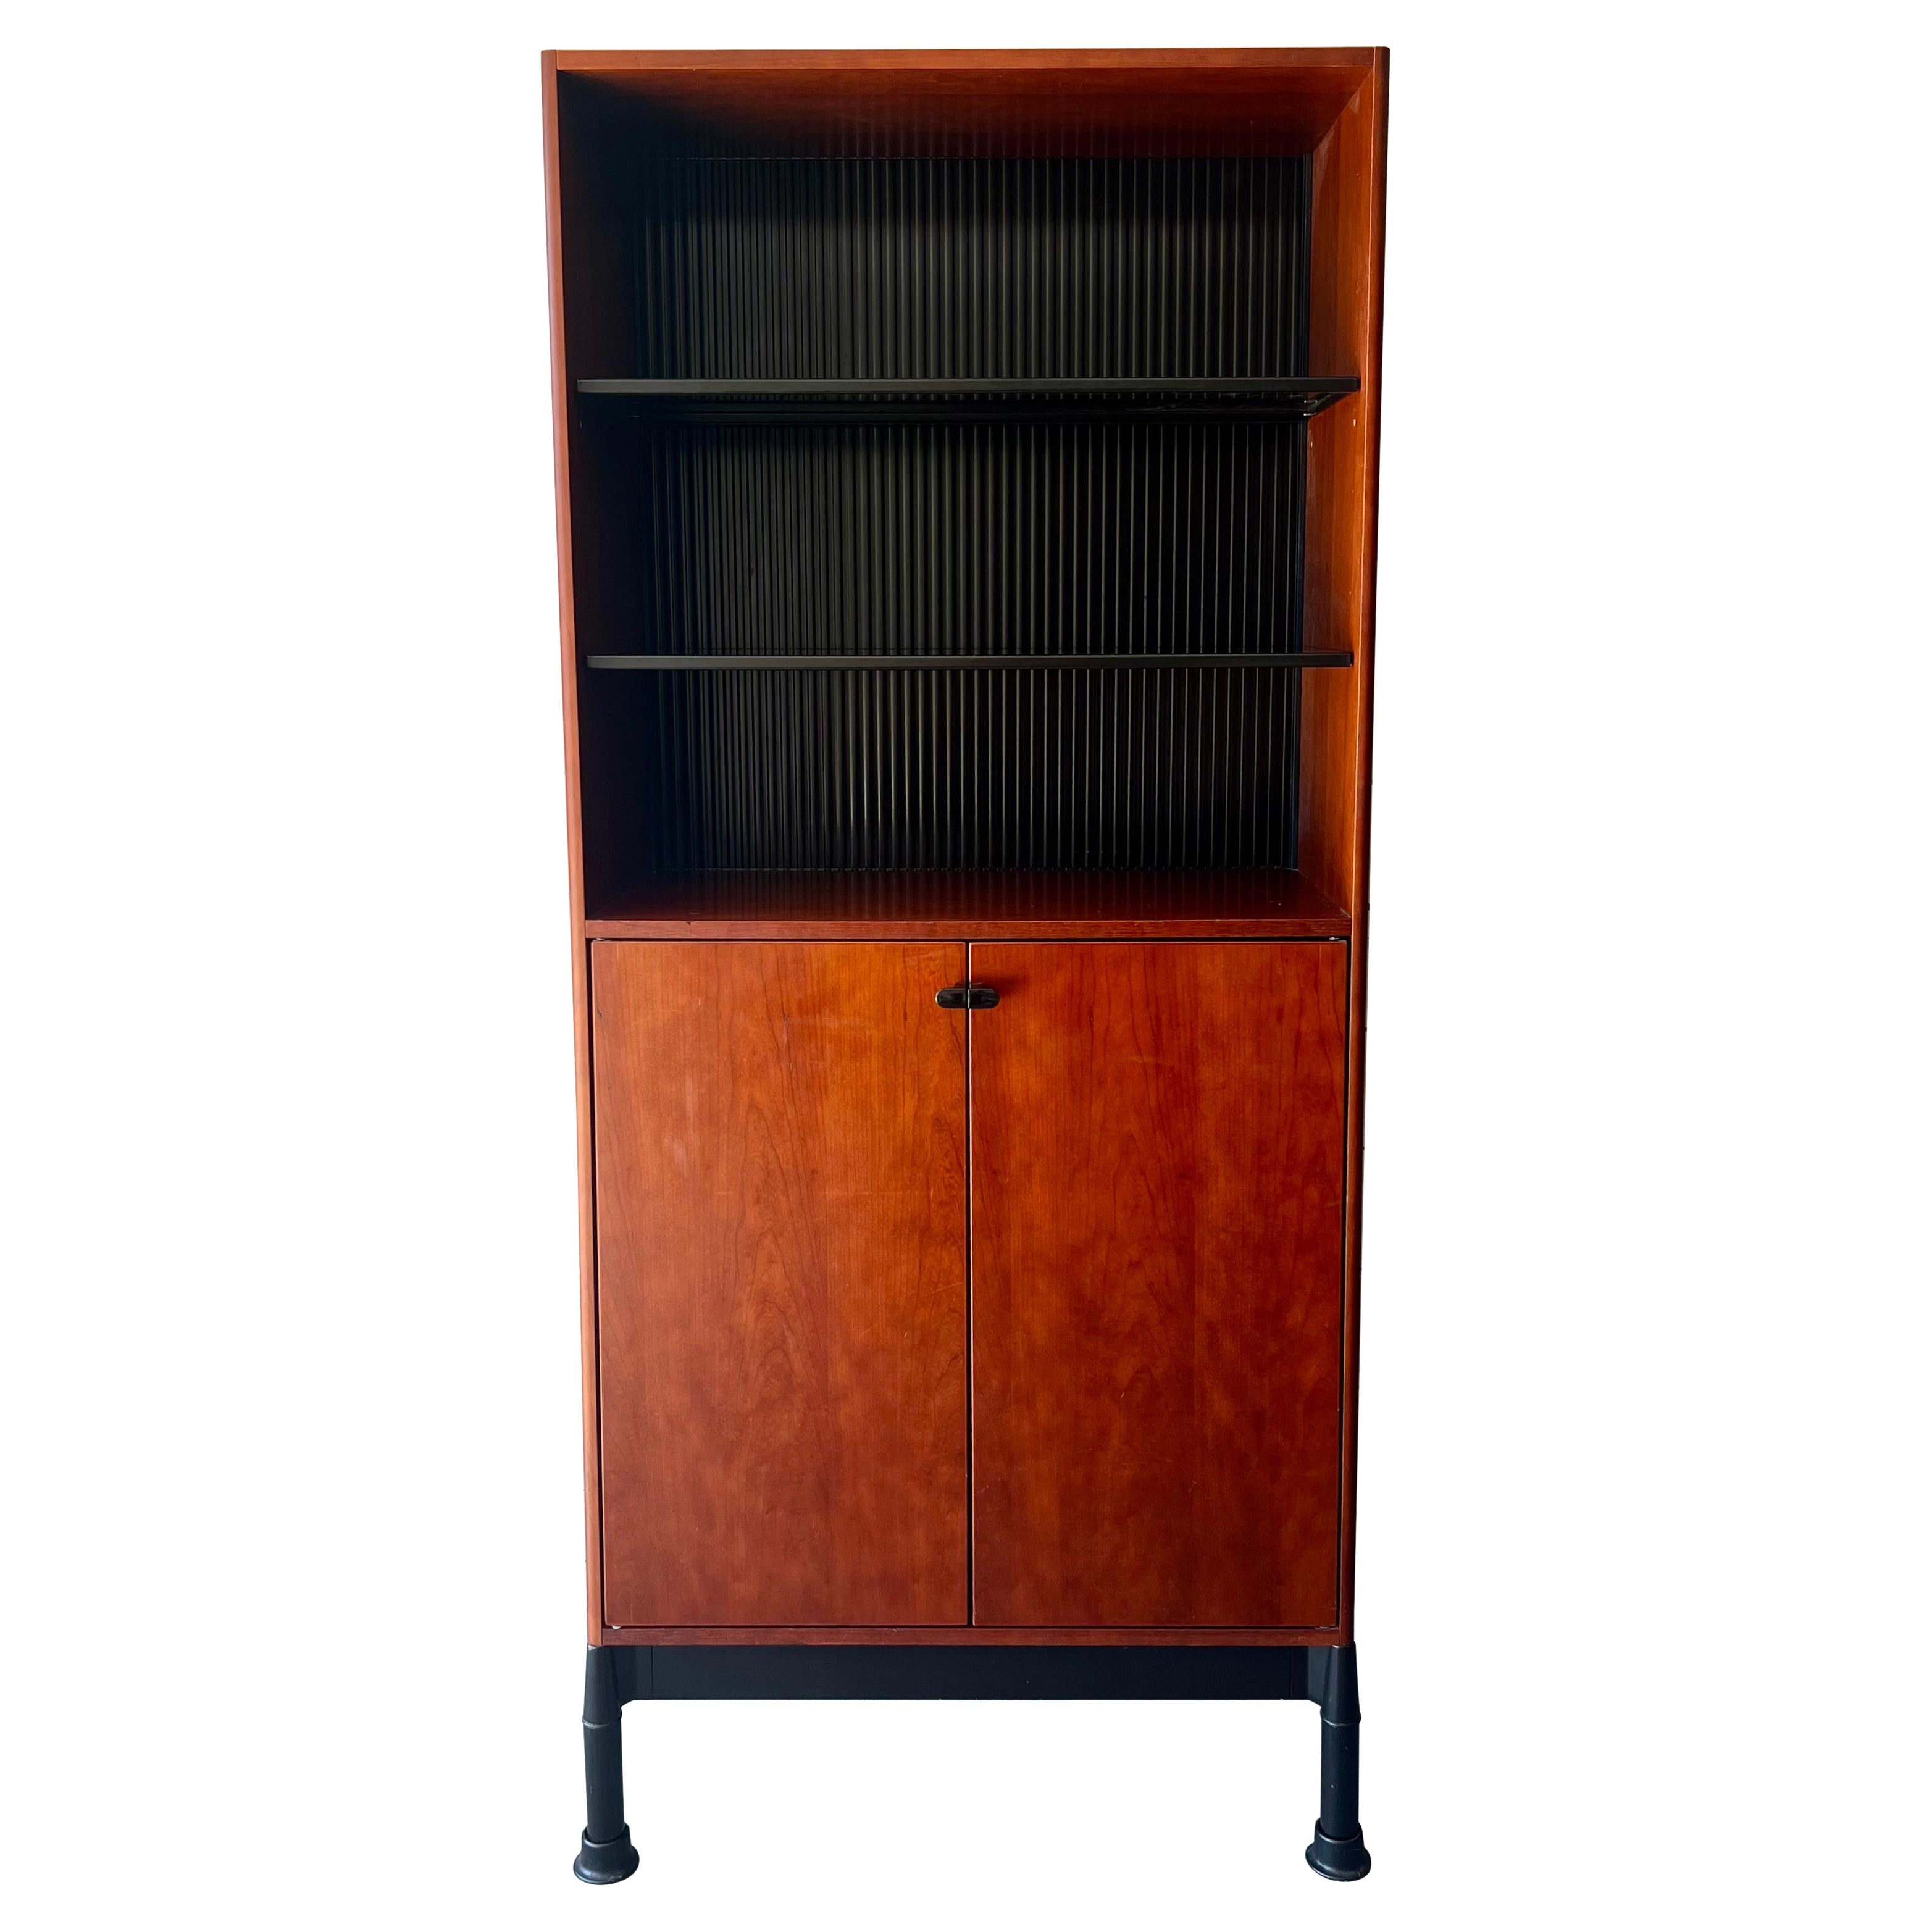 Relay Bookcase designed by Geoff Hollington for Herman Miller